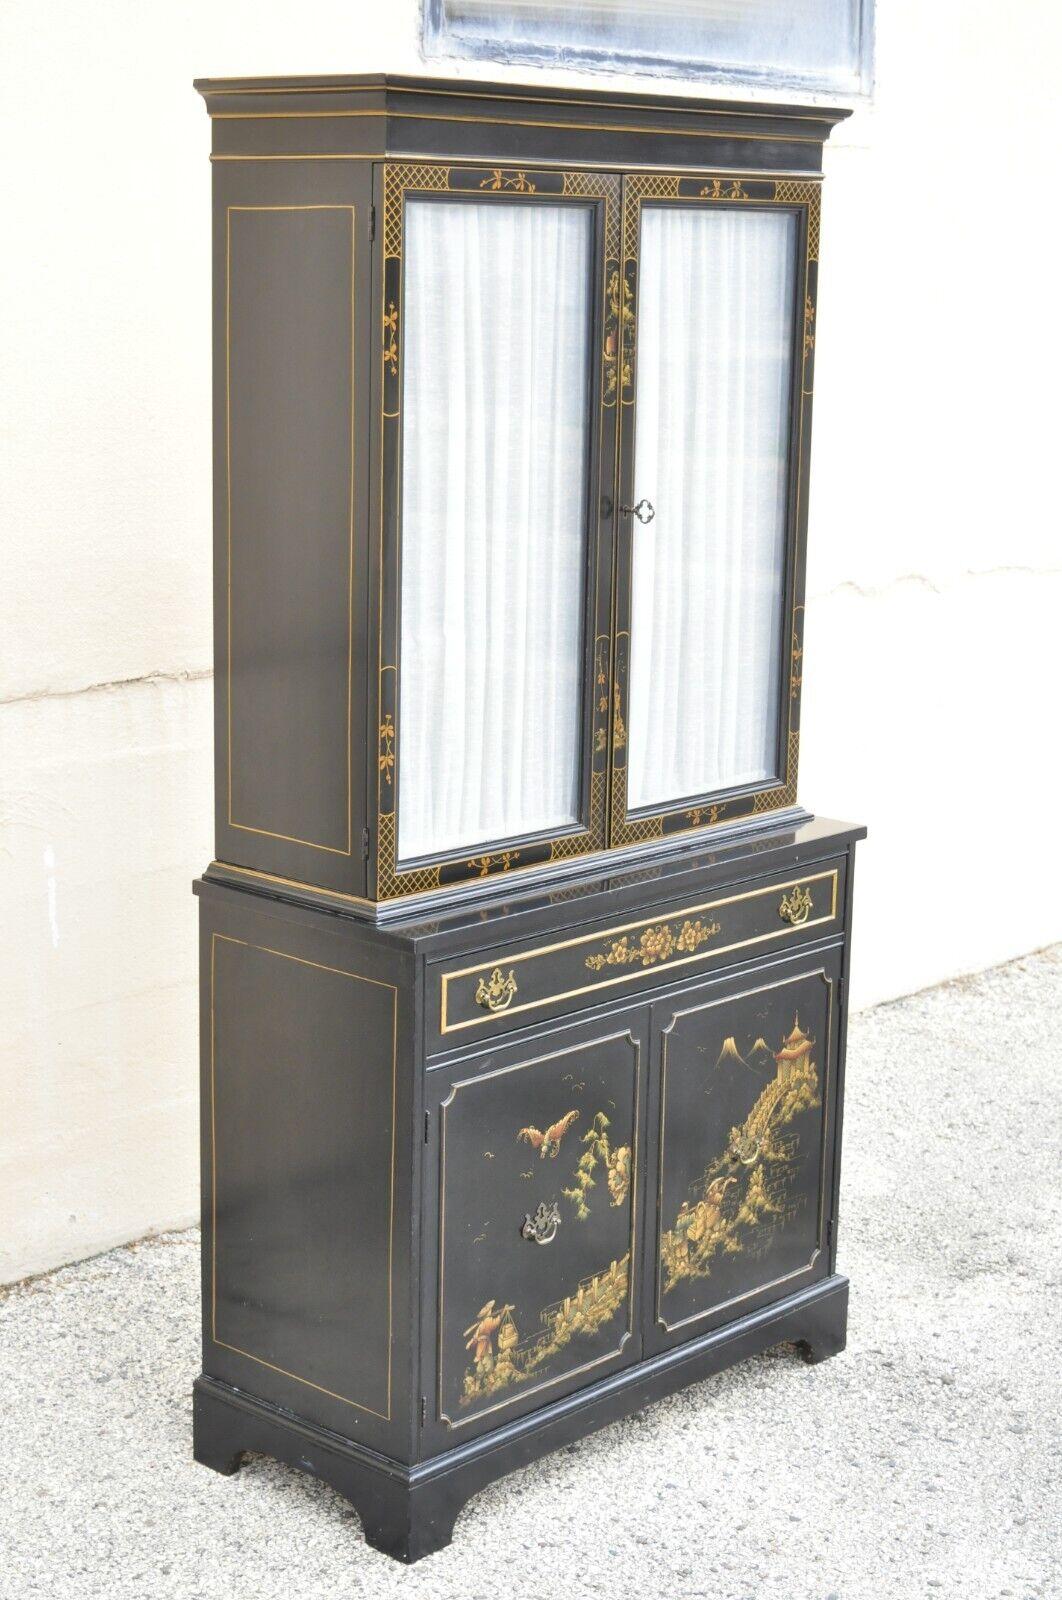 Vintage Chinoiserie Drexel Style Oriental Black Painted Glass Door China Cabinet. Item features 2 glass upper doors, 2 lower doors, 1 dovetailed drawer, working lock and key, very nice vintage item. Circa Mid 20th Century. Measurements: 70.5